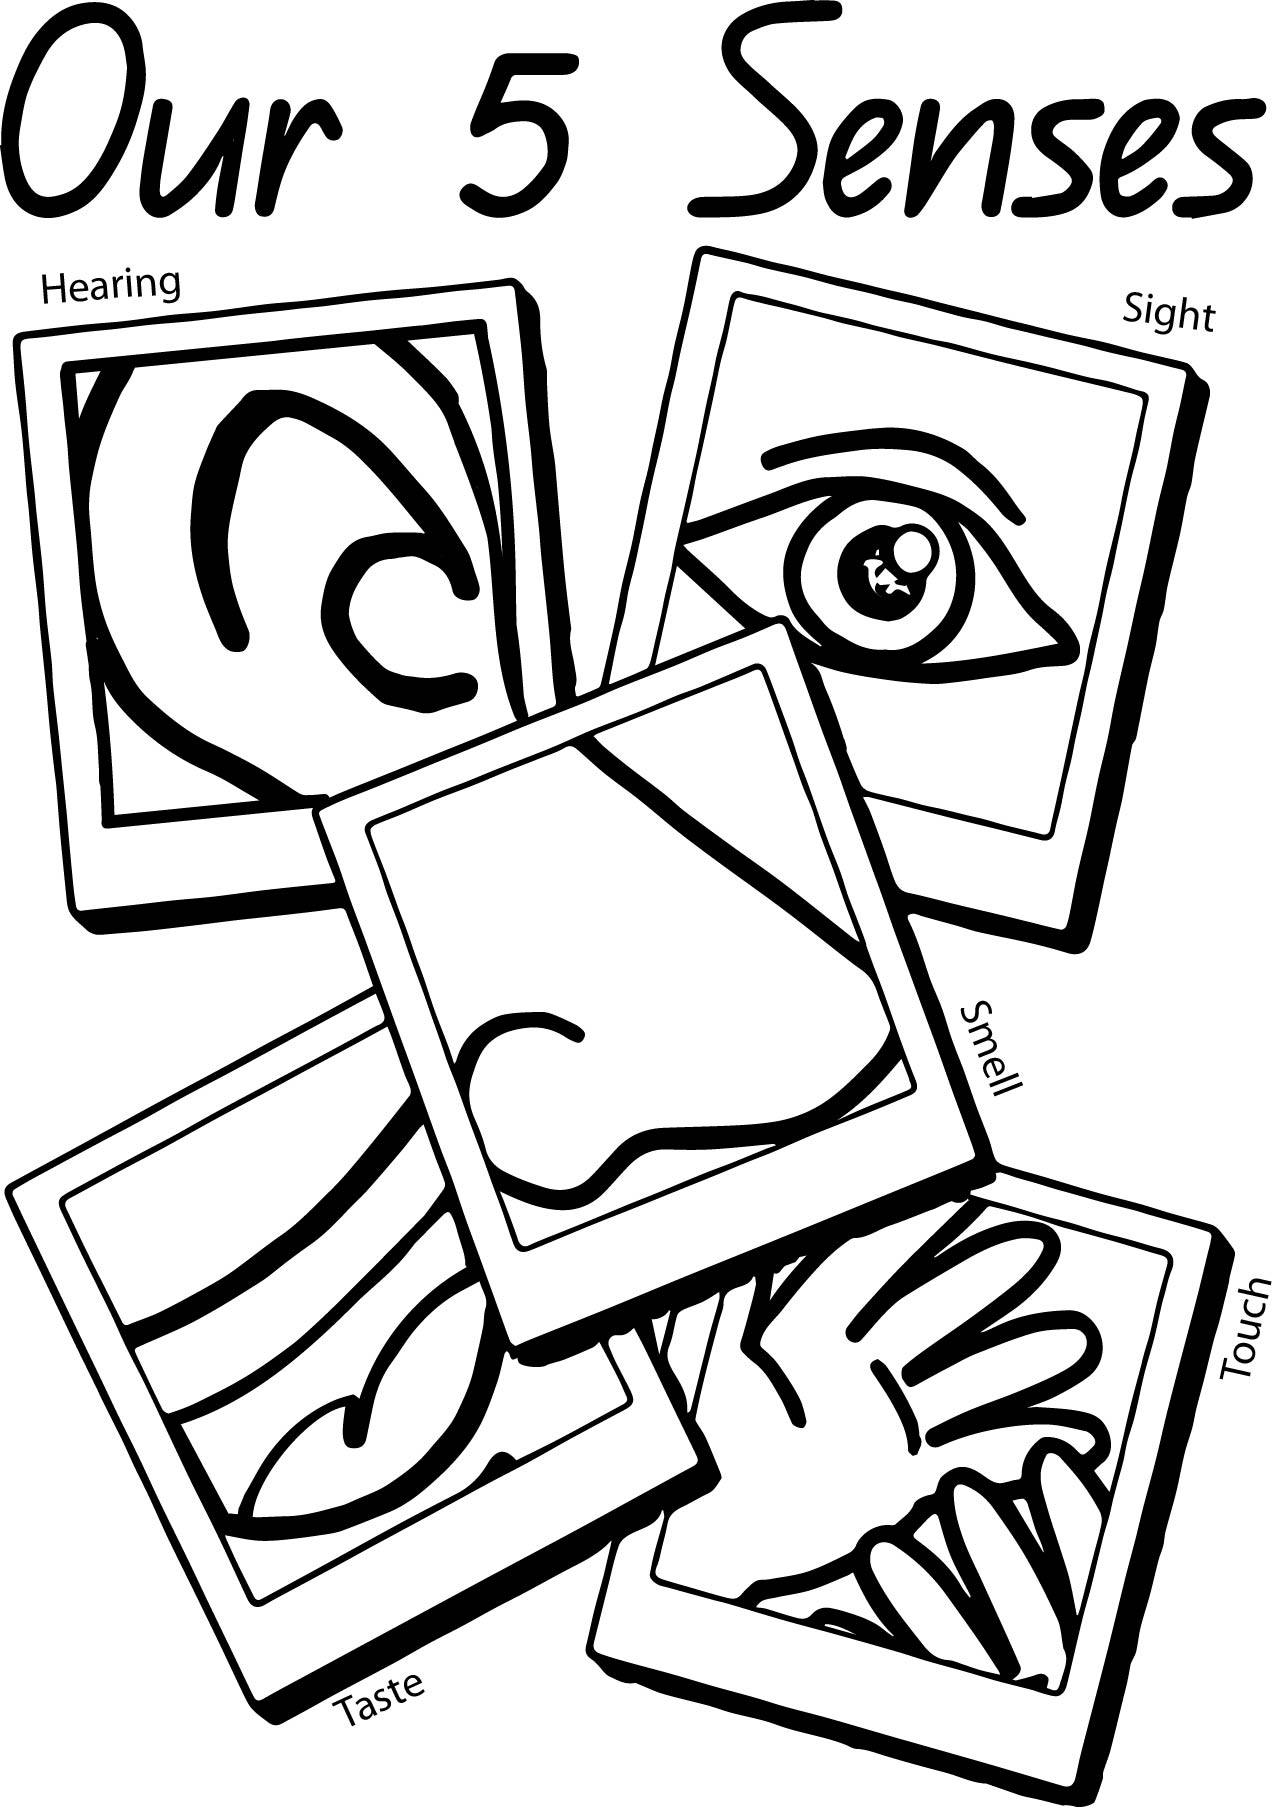 5 Senses Coloring Pages | Free download on ClipArtMag